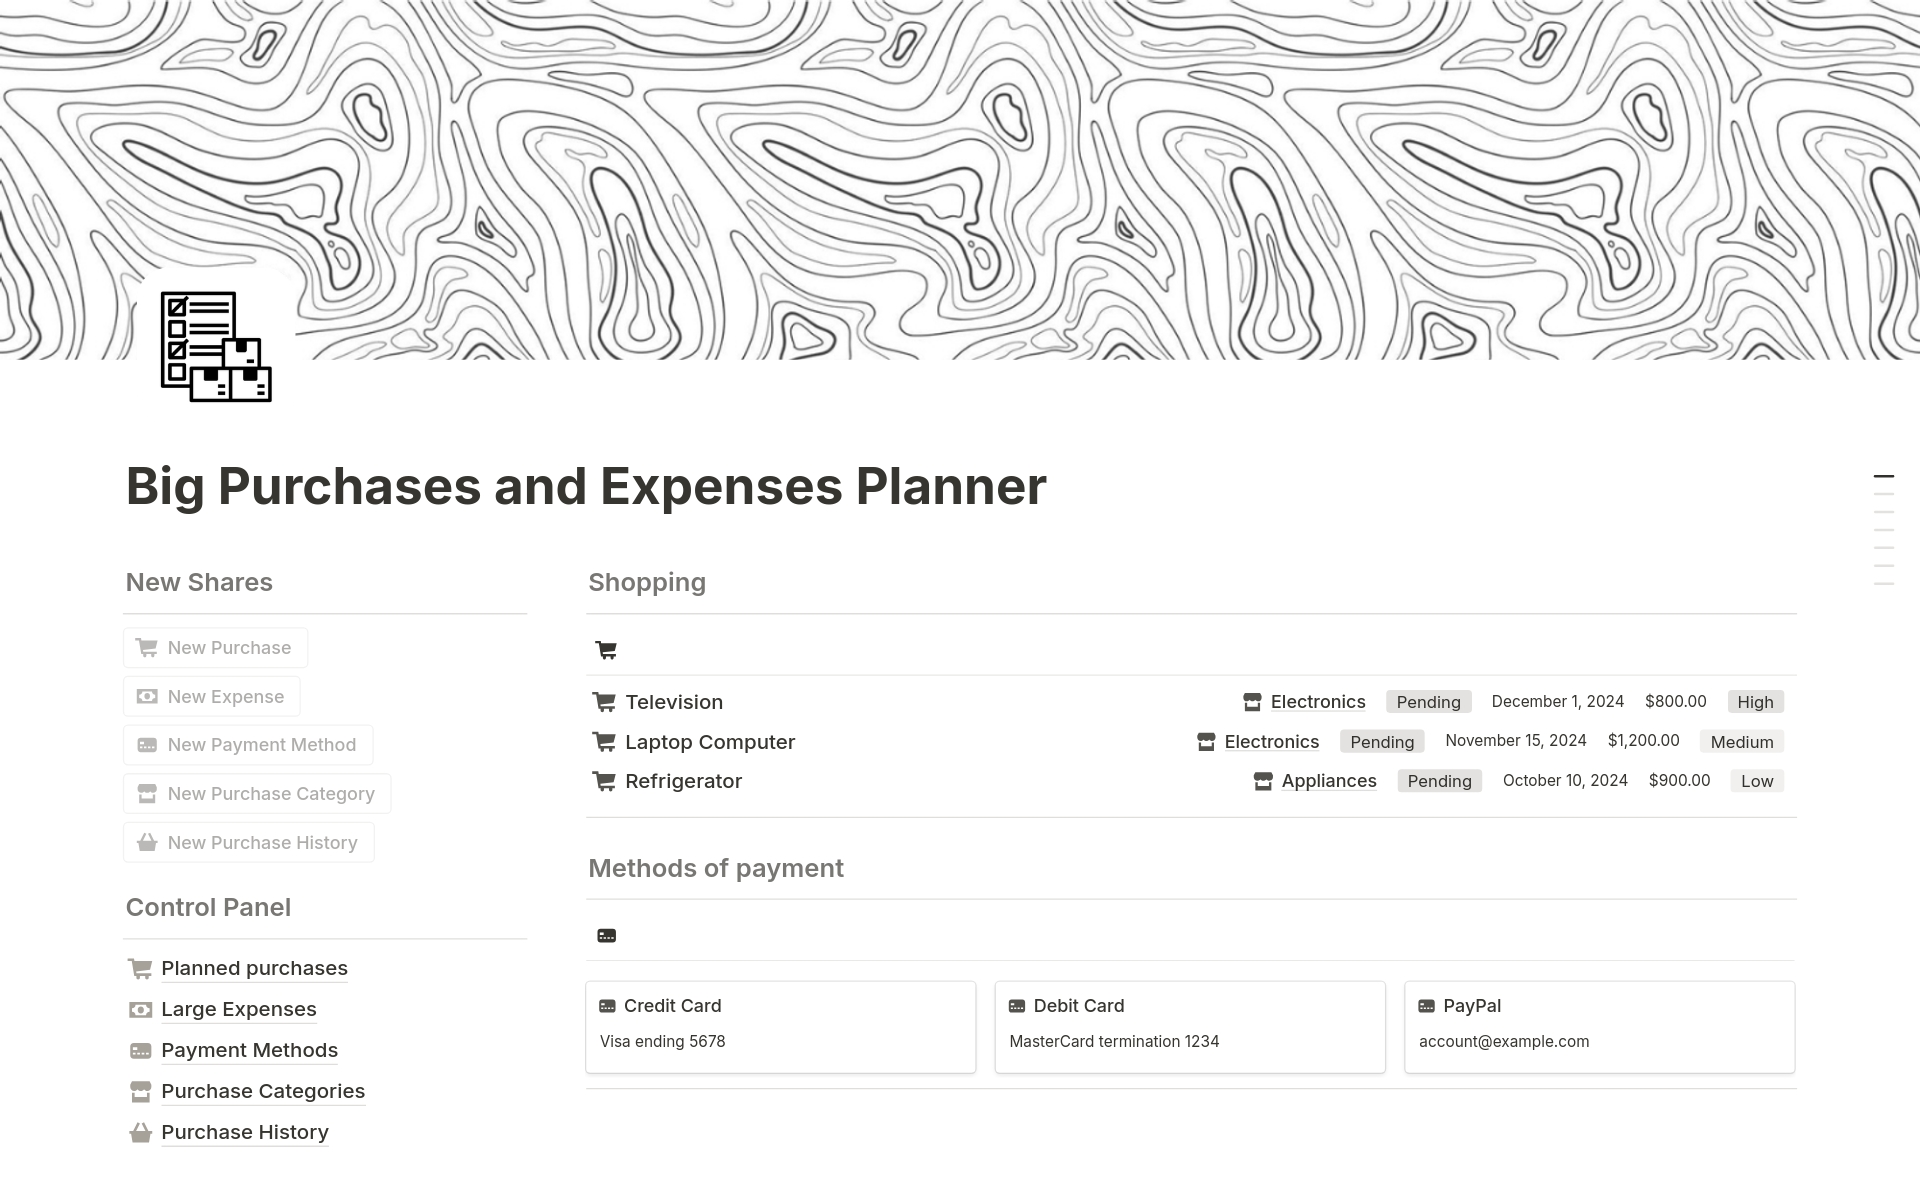 Plan important purchases with our Notion template. Ideal for managing large expenses efficiently.